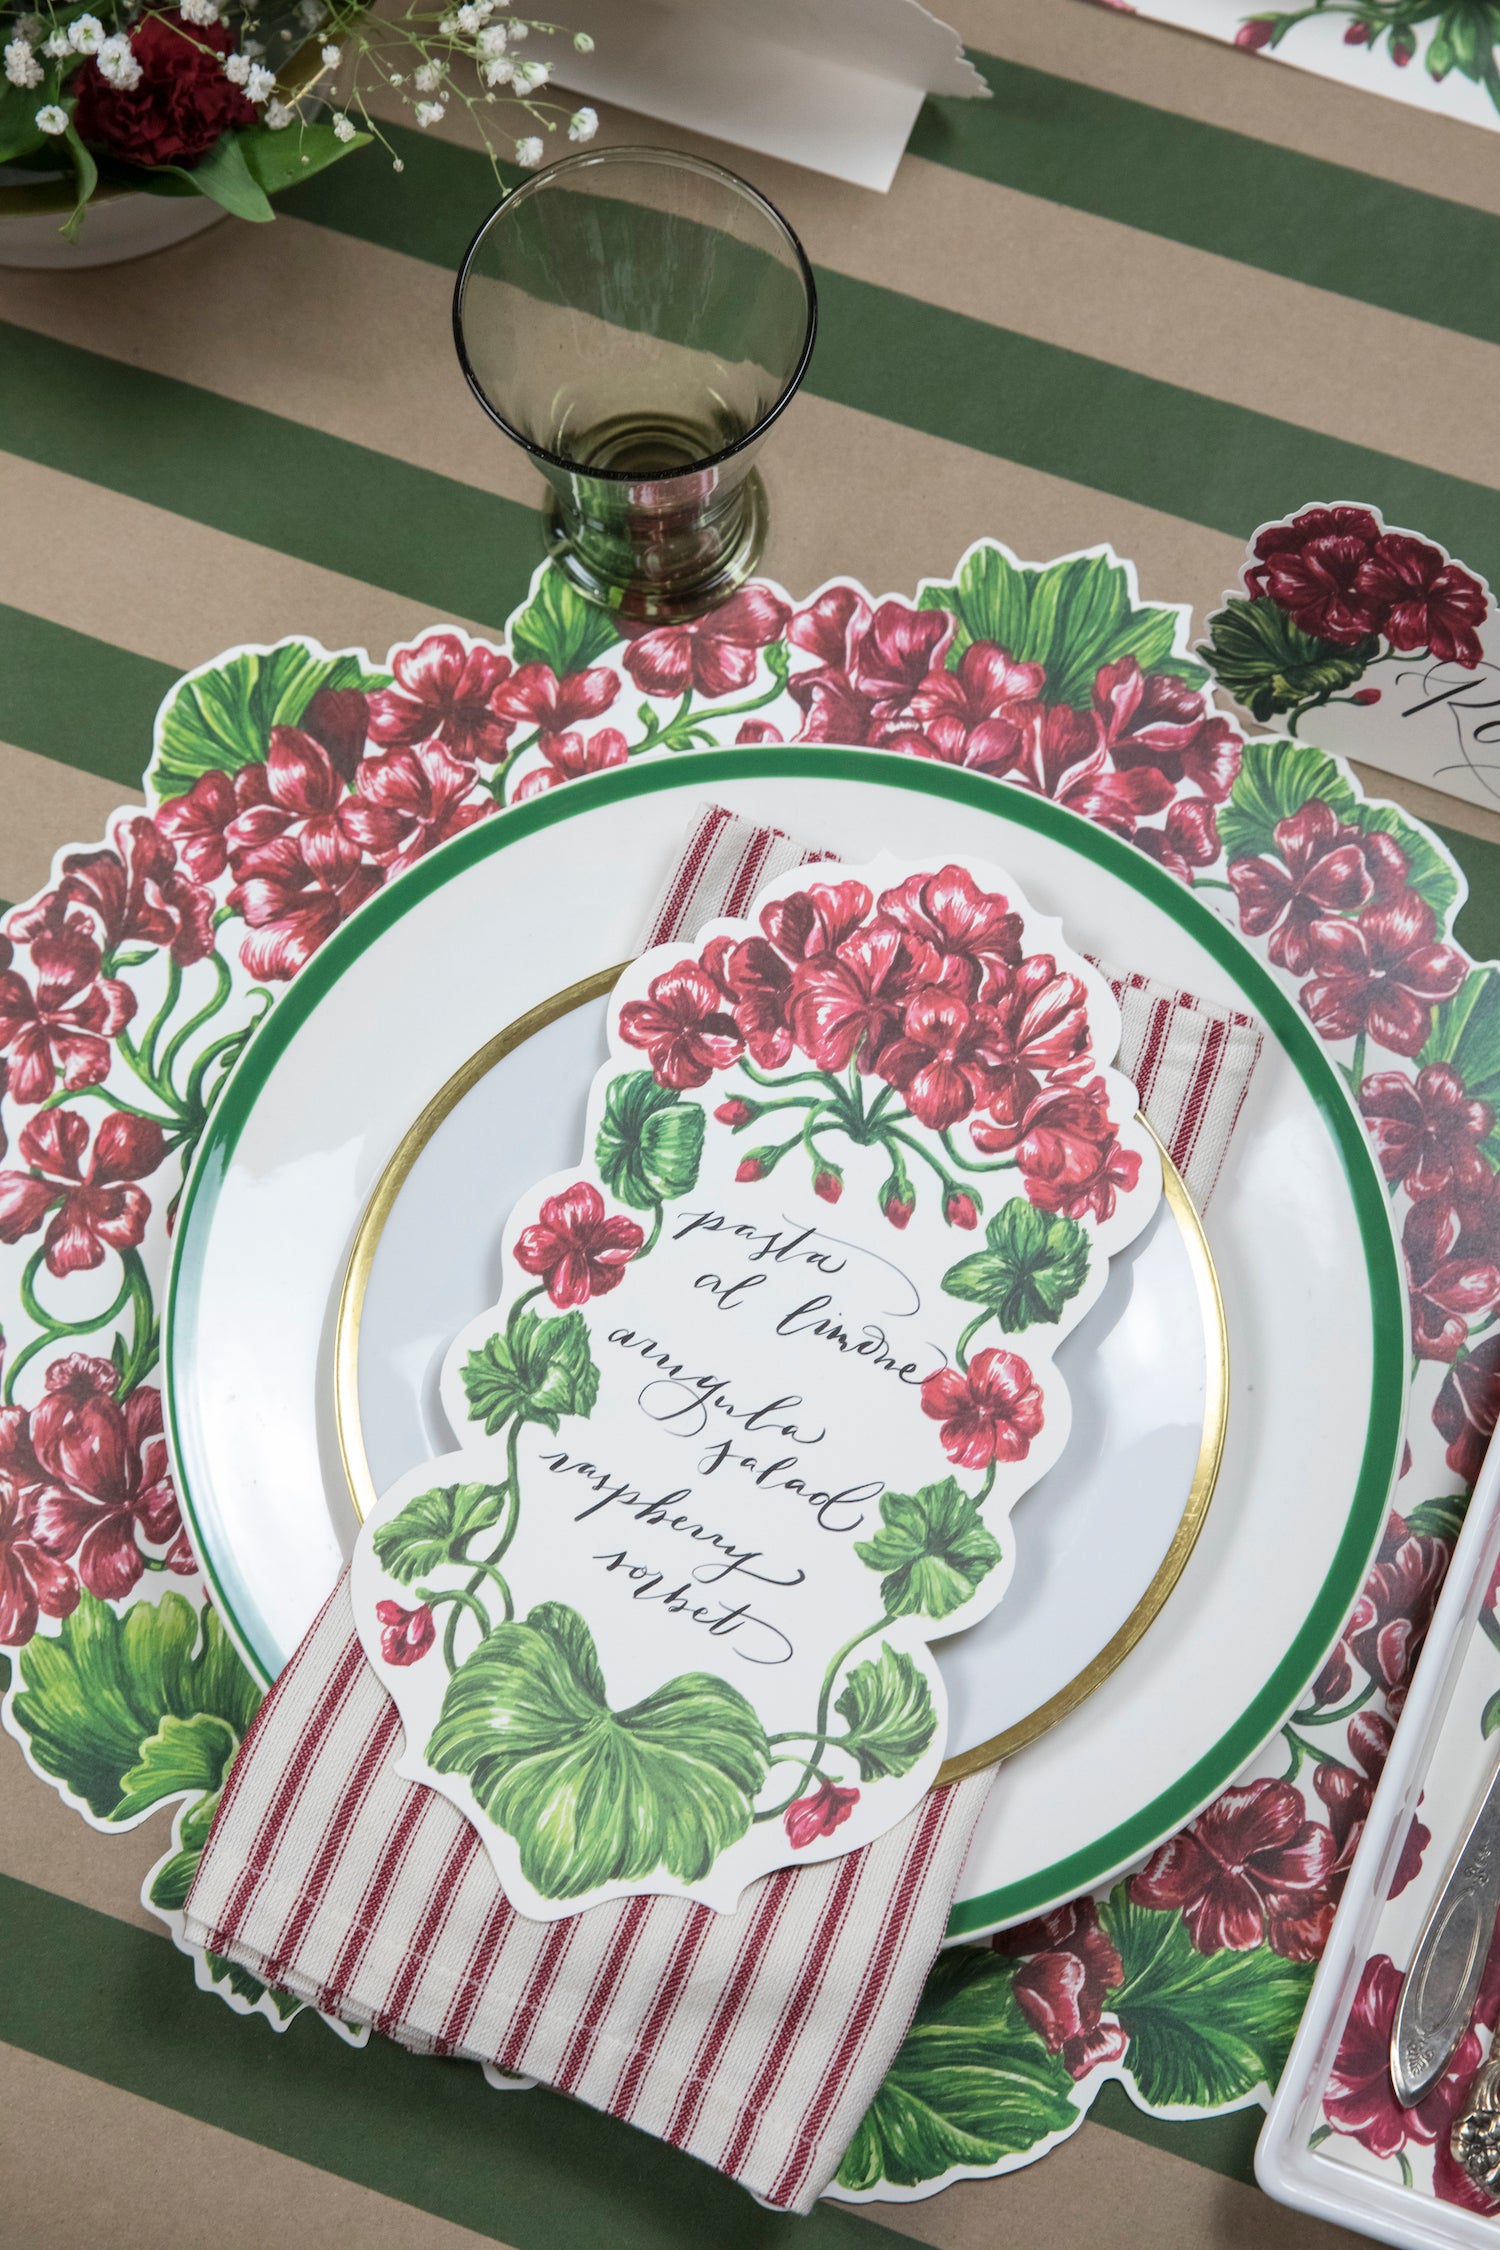 A table setting with Die-cut Geranium Placemat from Hester &amp; Cook and red and green flowers.